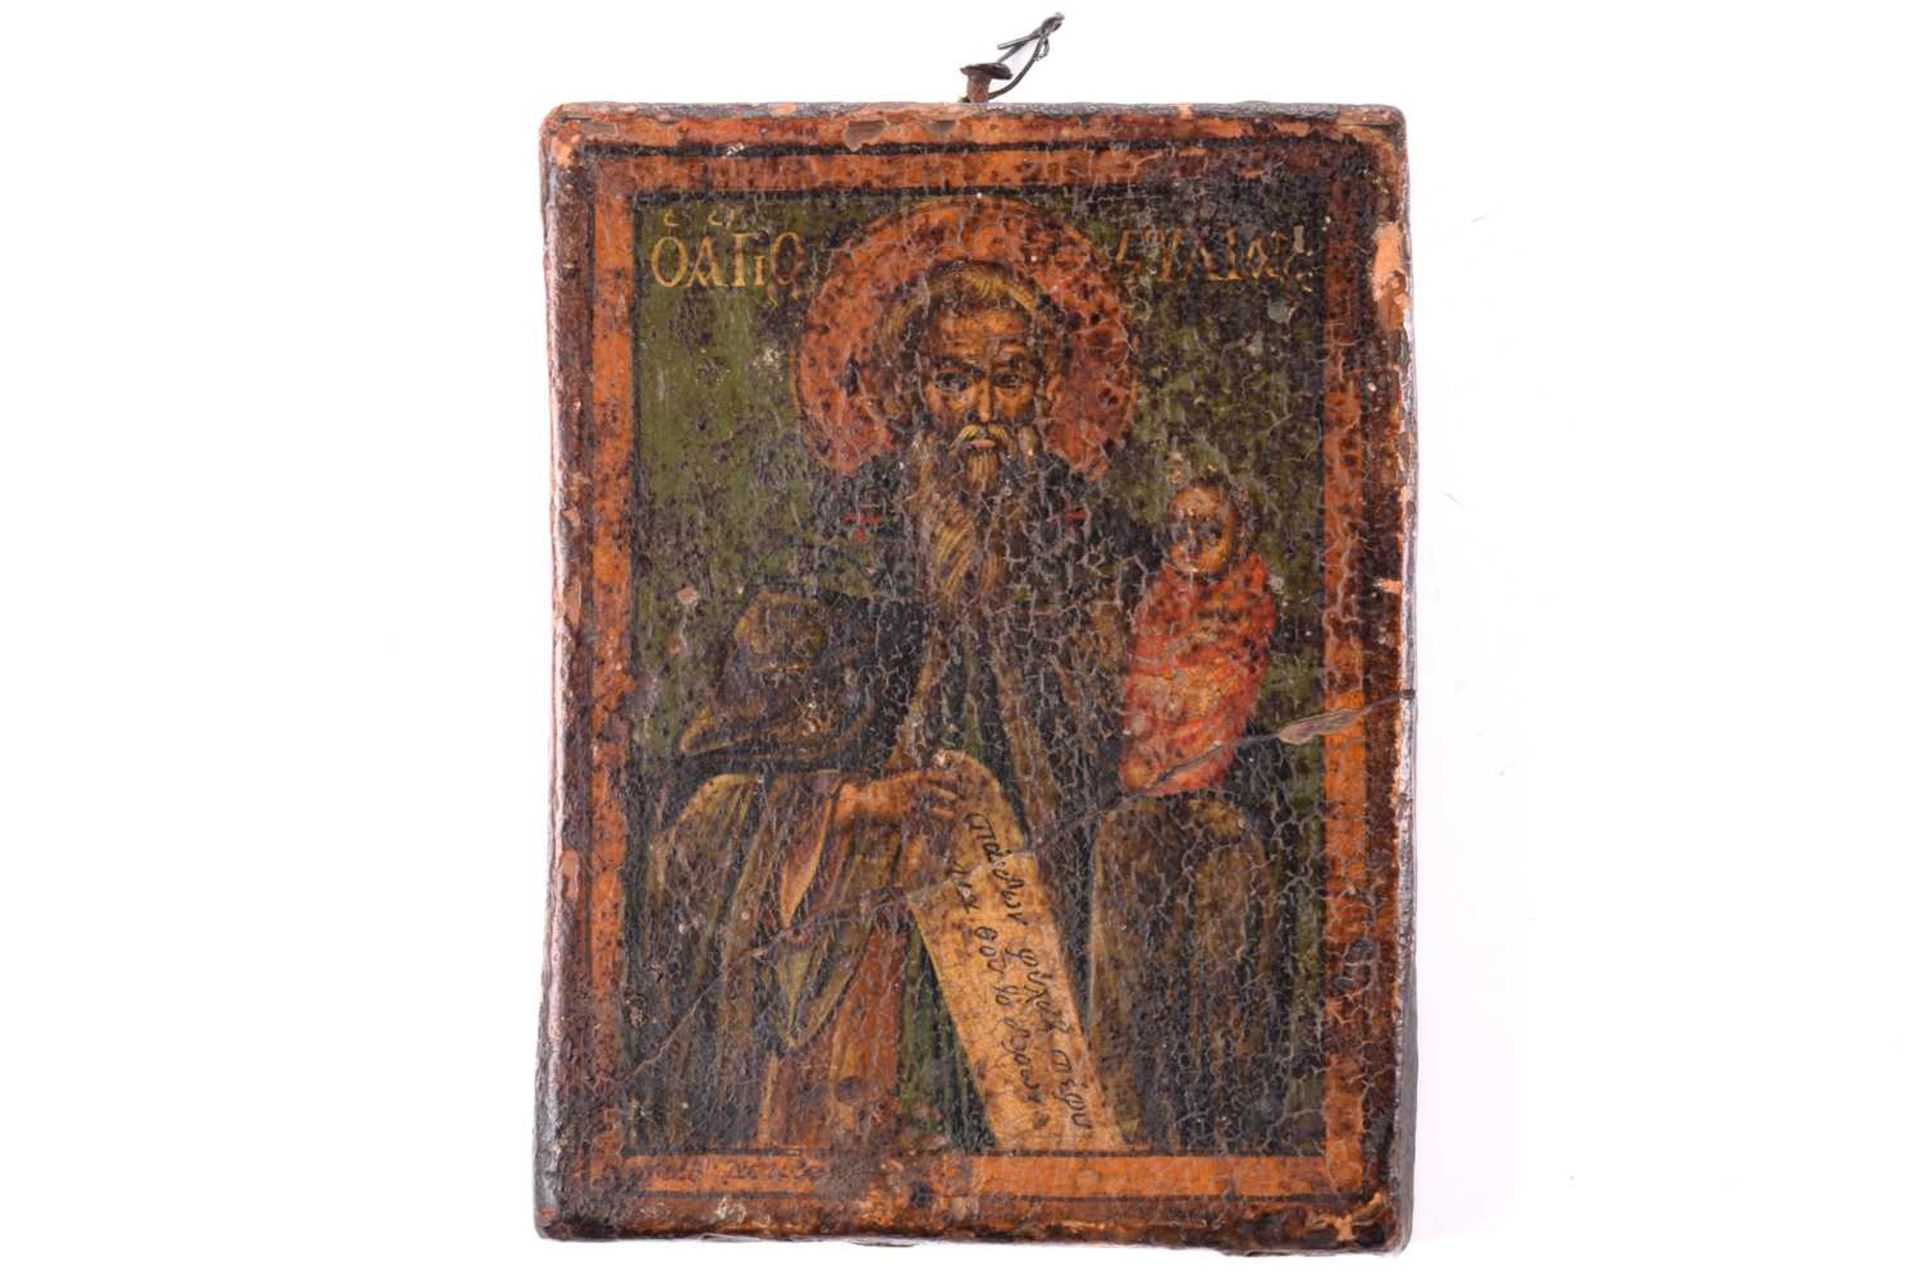 A Greek Orthodox icon of St. John of Patmos and infant Jesus, probably 18th century, with